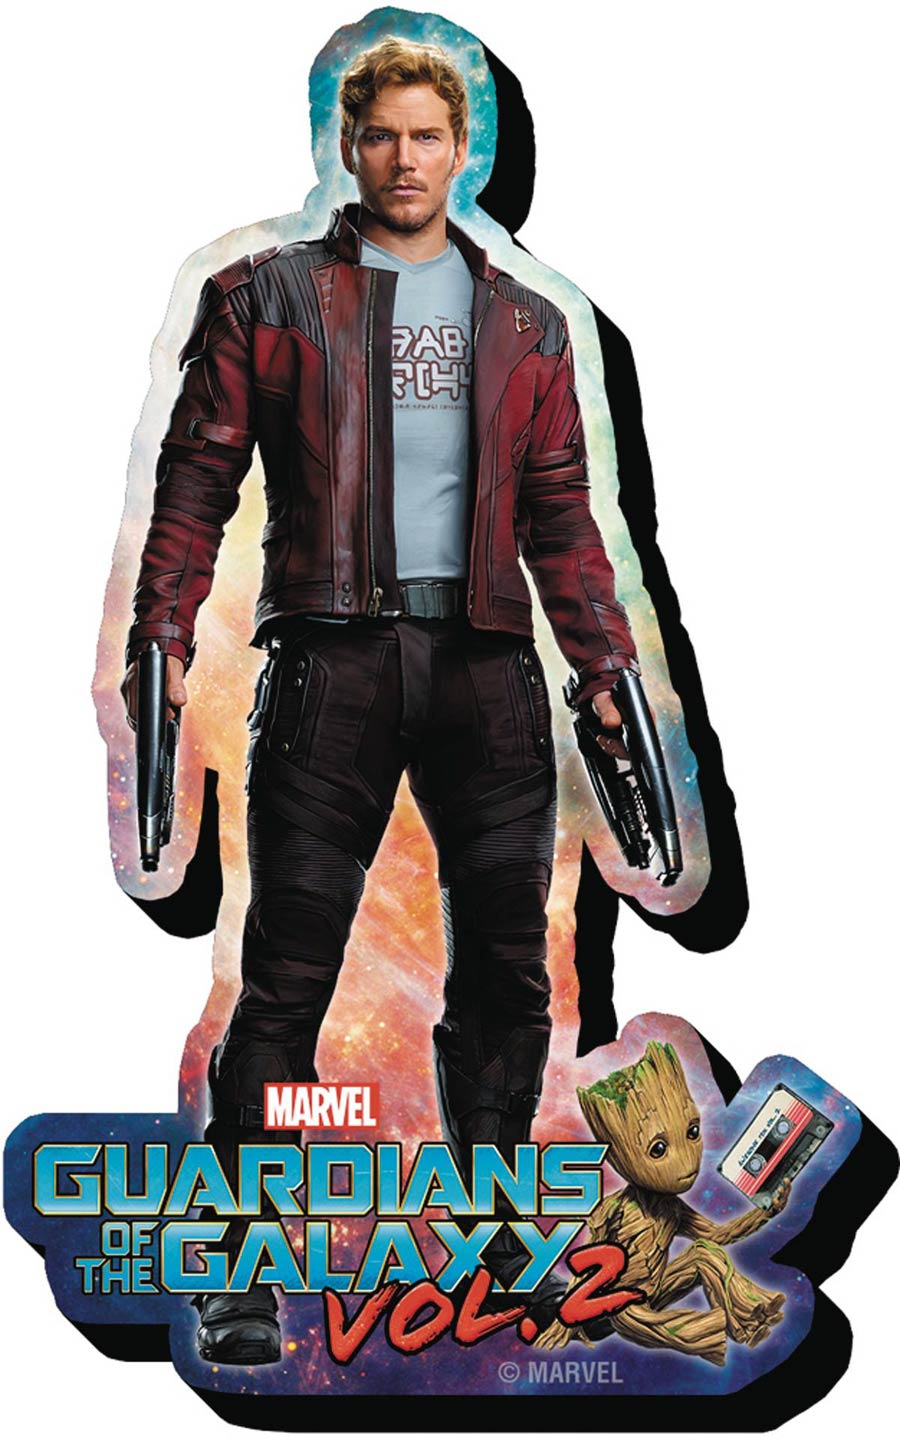 Guardians Of The Galaxy Vol 2 Chunky Magnet - Star-Lord